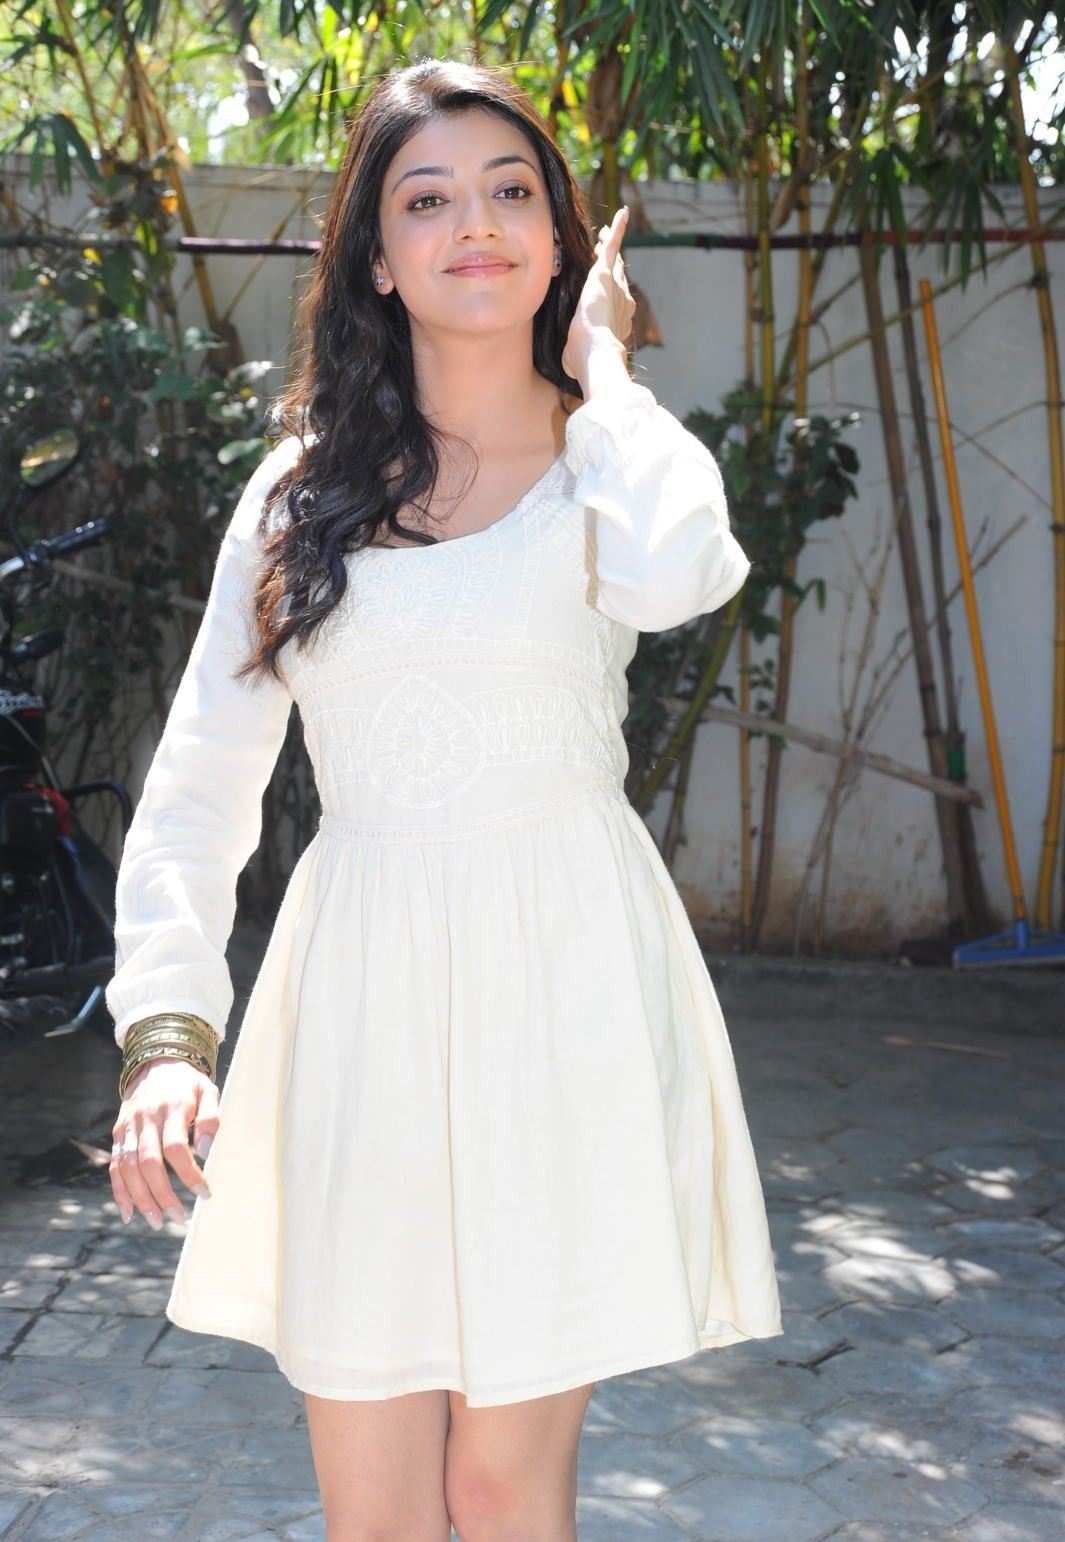 High Quality Bollywood Celebrity Pictures Kajal Agarwal Looks Beautiful And Sexy In White Dress